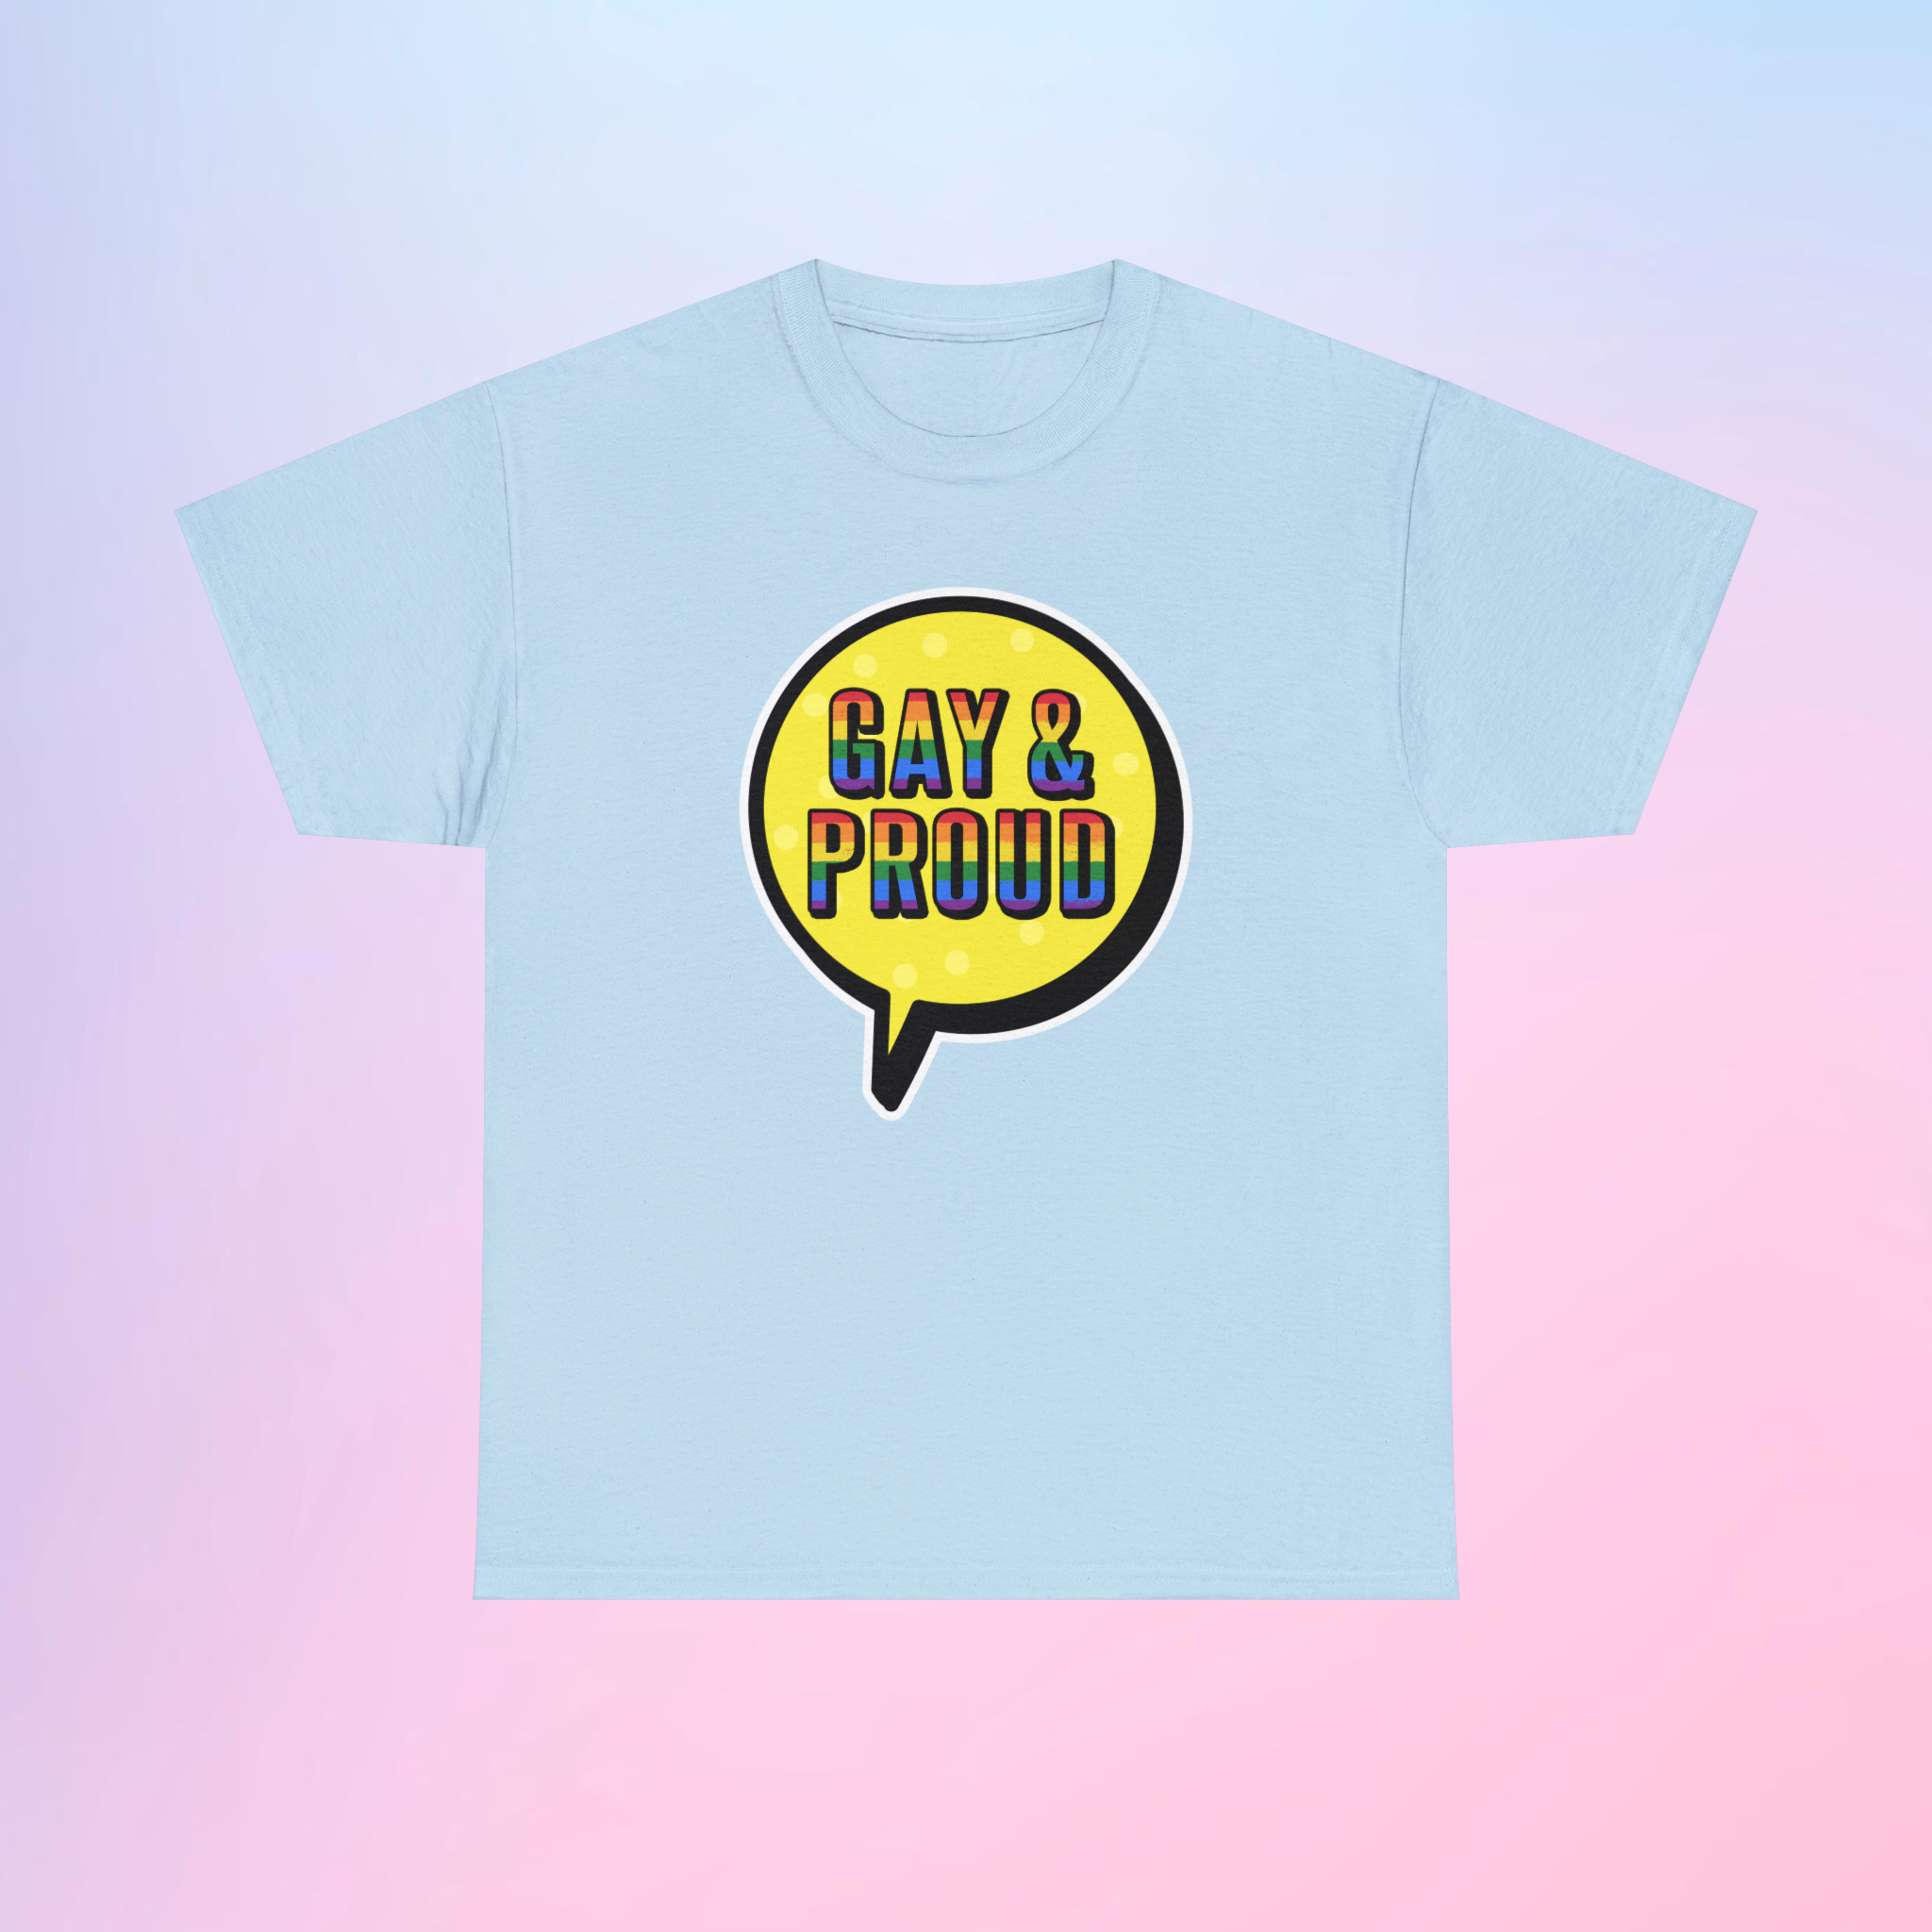 A comfortable Gay & Proud t-shirt with pride logo.